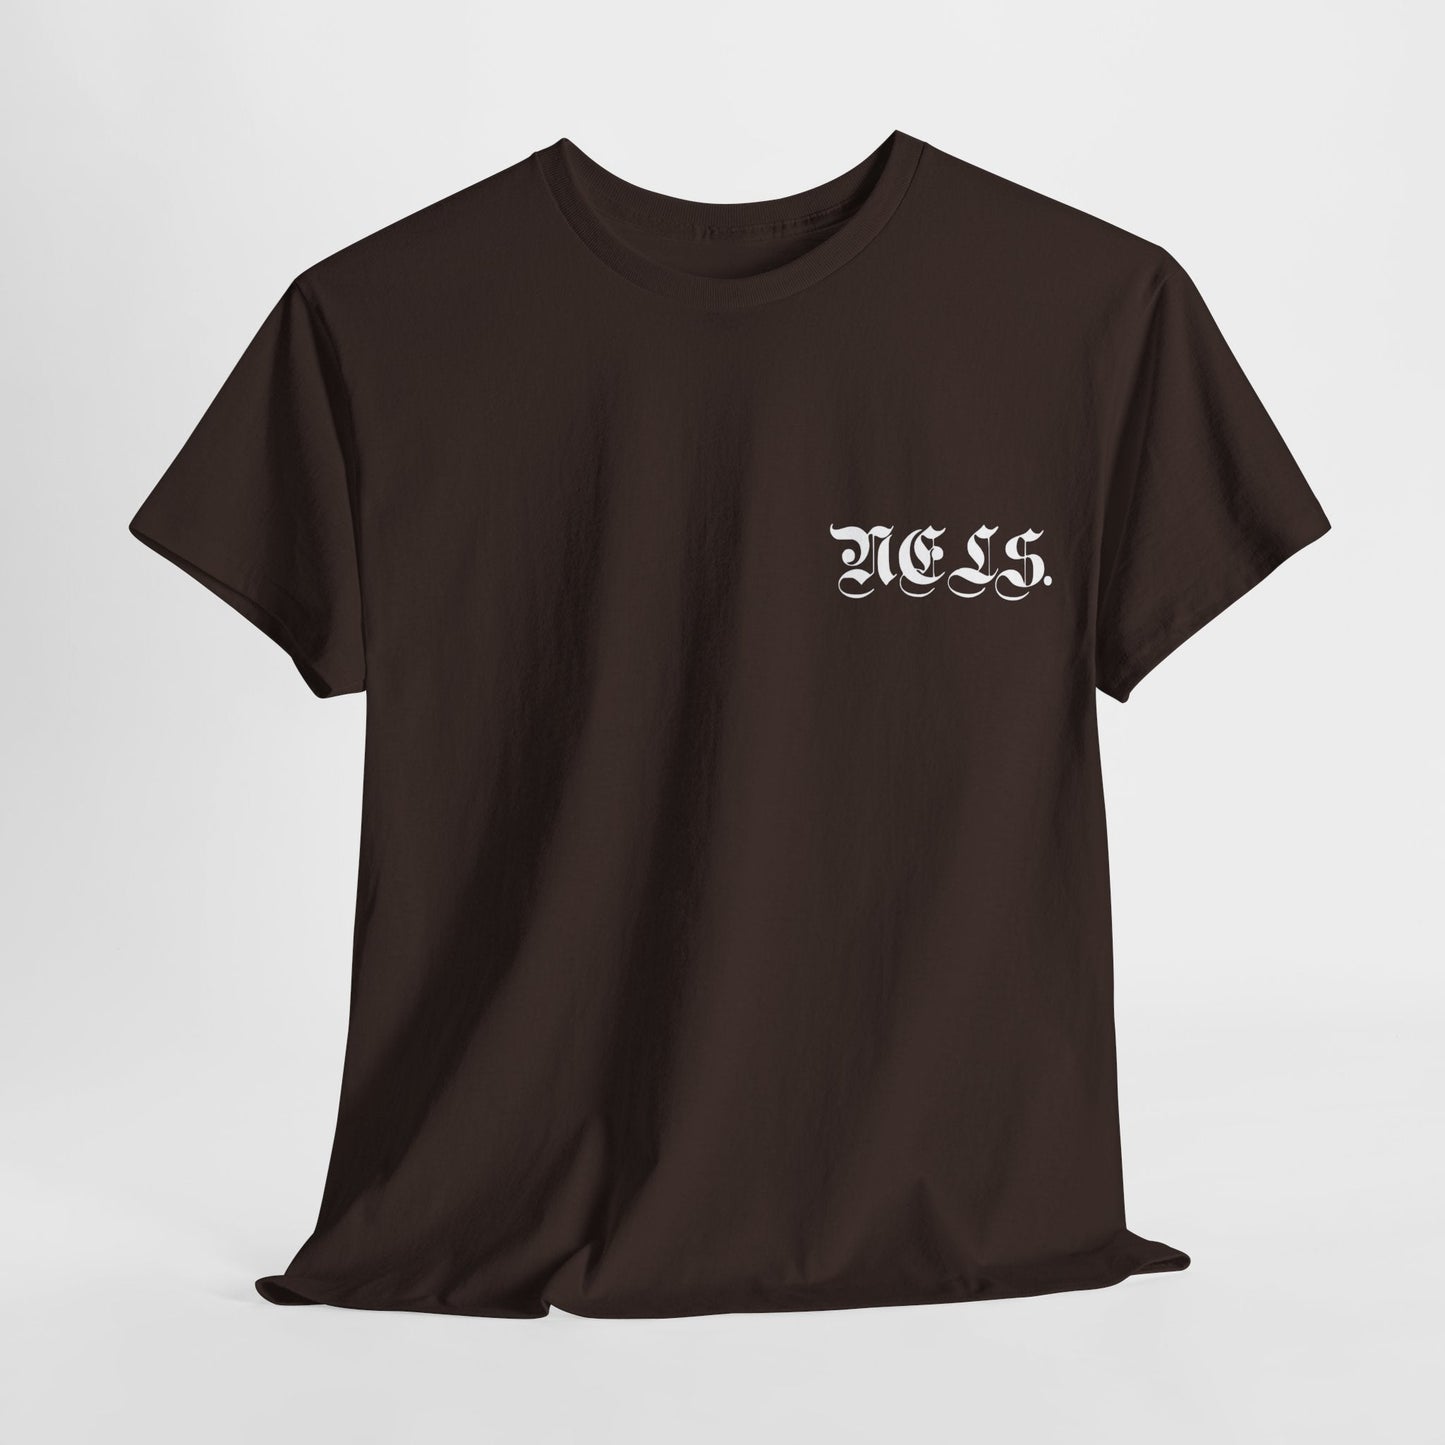 Tee NELS. Live Life In Full Bloom Front and Back - NELS.